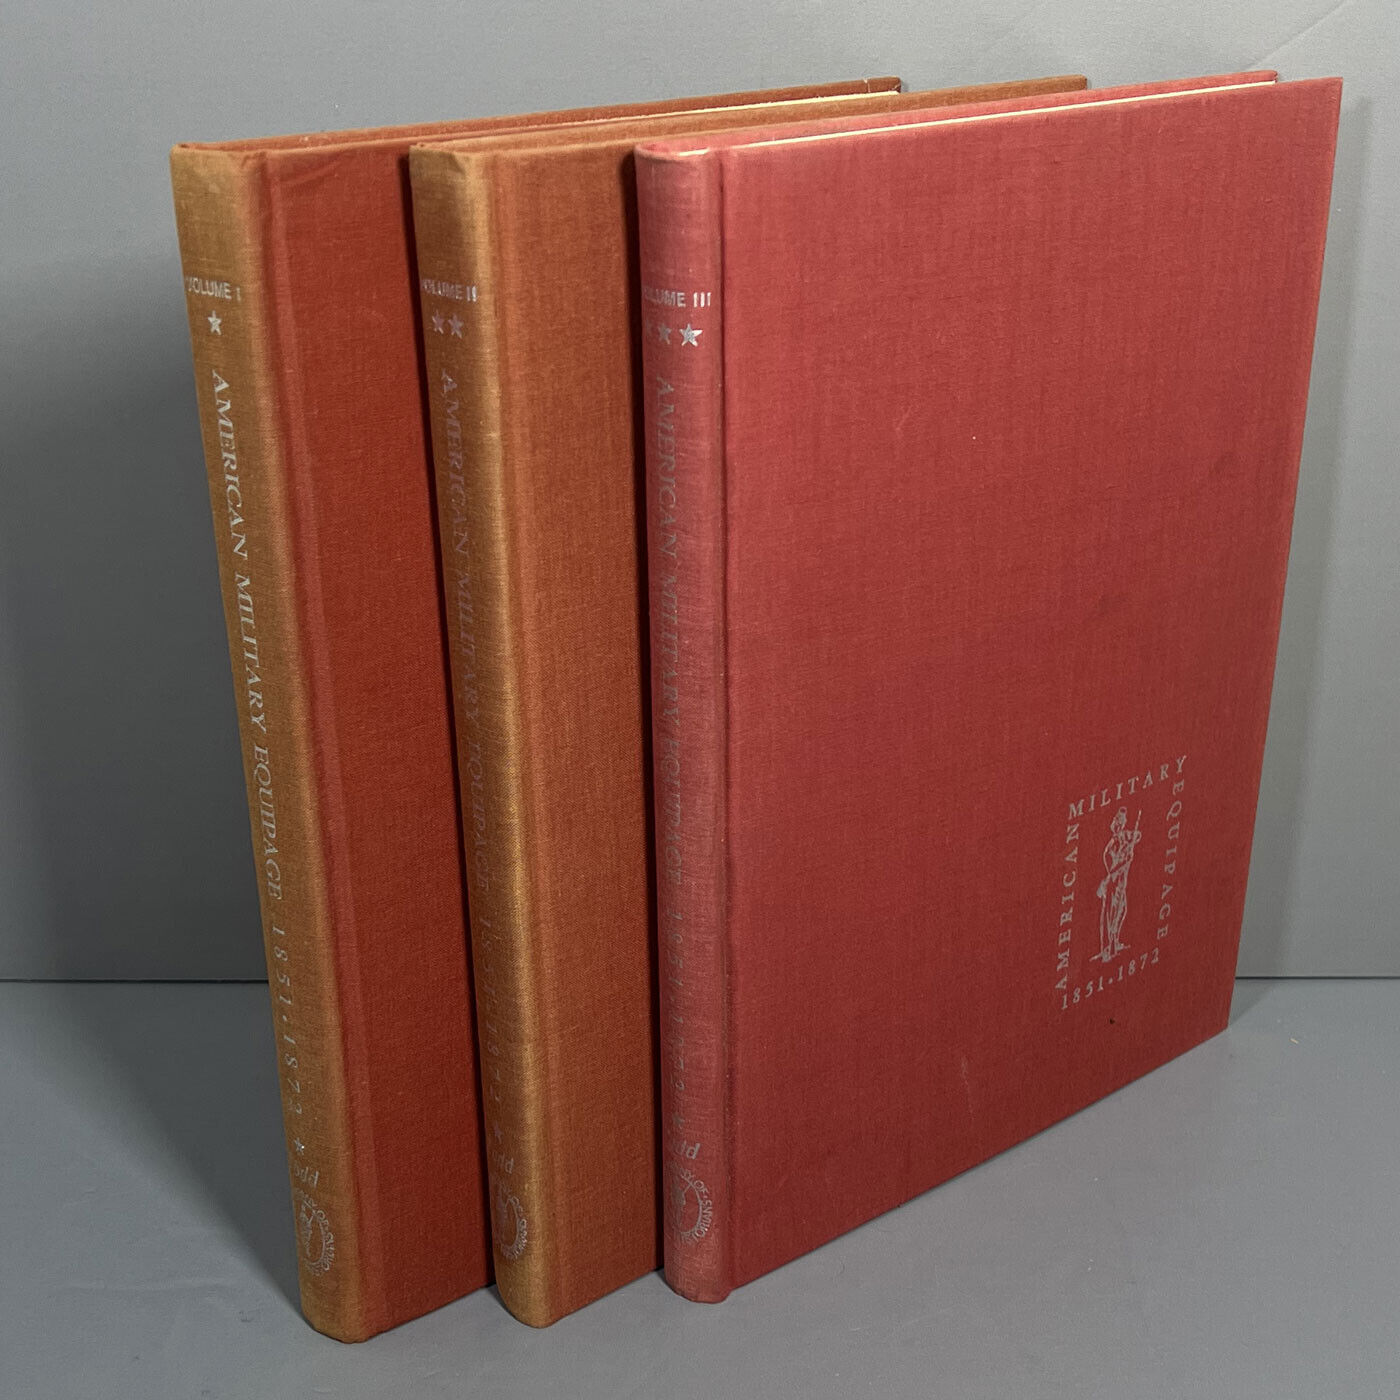 AMERICAN MILITARY EQUIPAGE 1851-1872 (3 Volume Set) by Frederick Todd - 1st Eds.